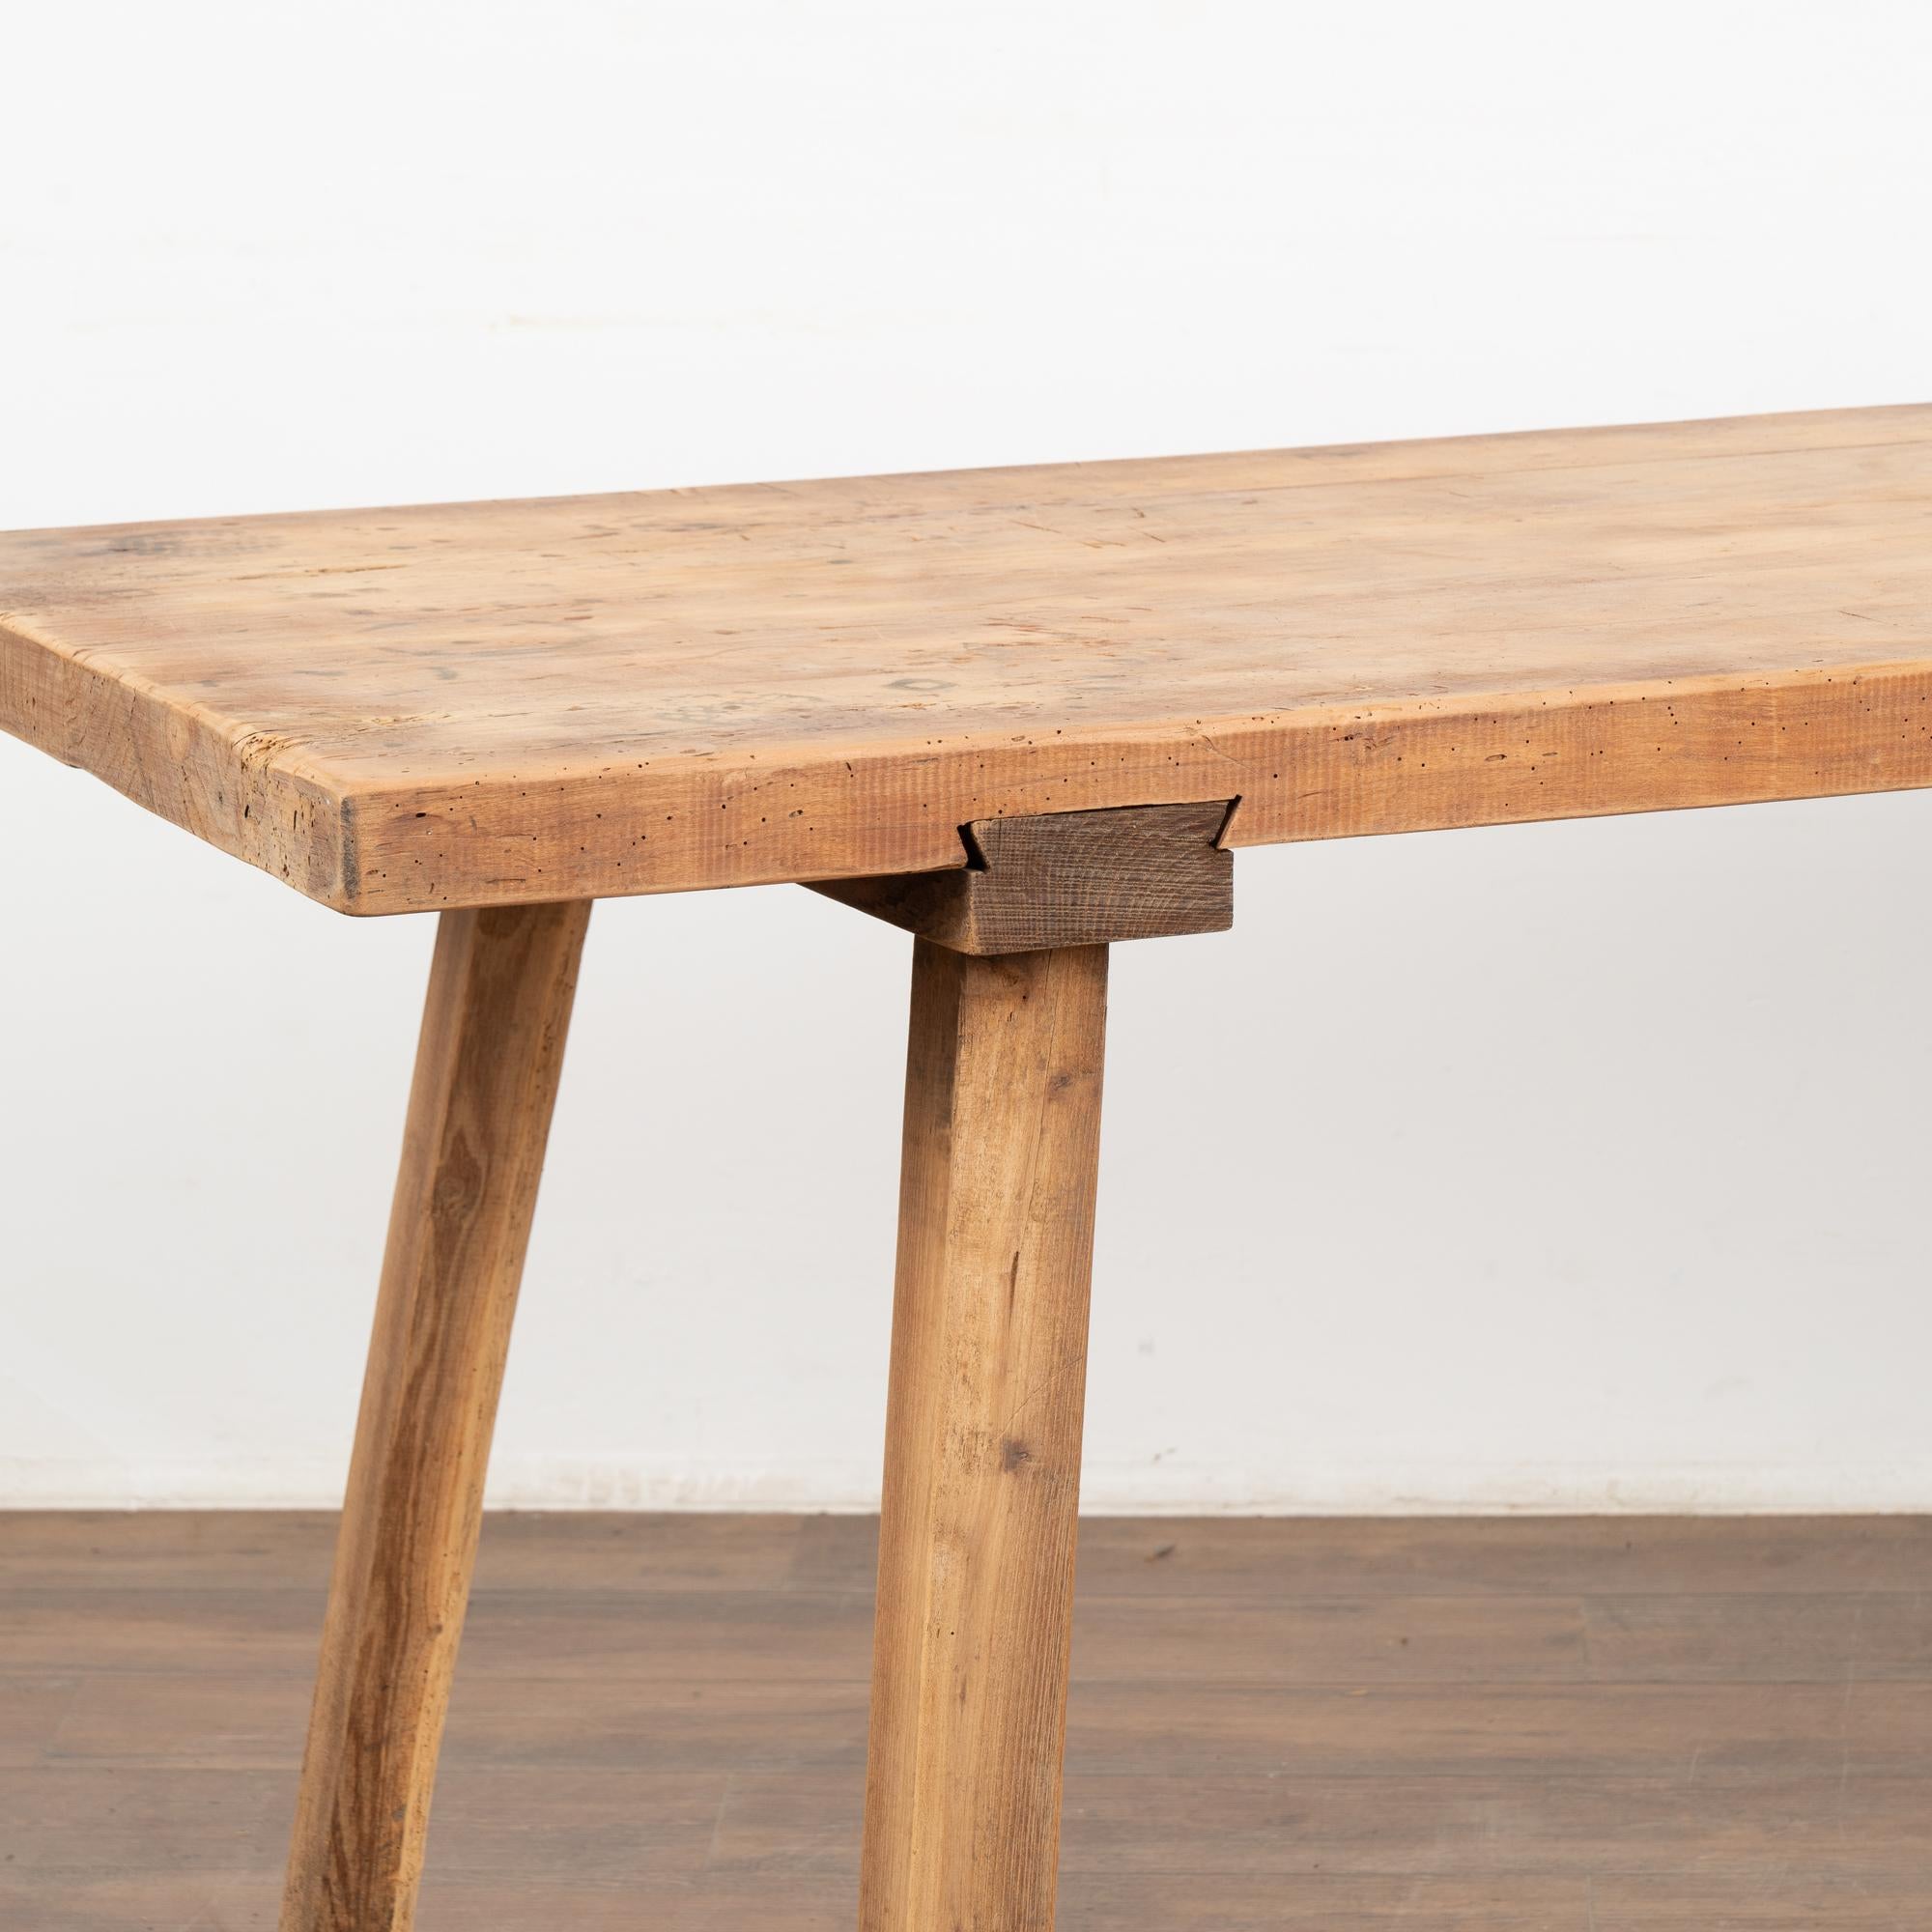 Hungarian Rustic Plank Top Console Table With Peg Legs, Hungary circa 1900 For Sale